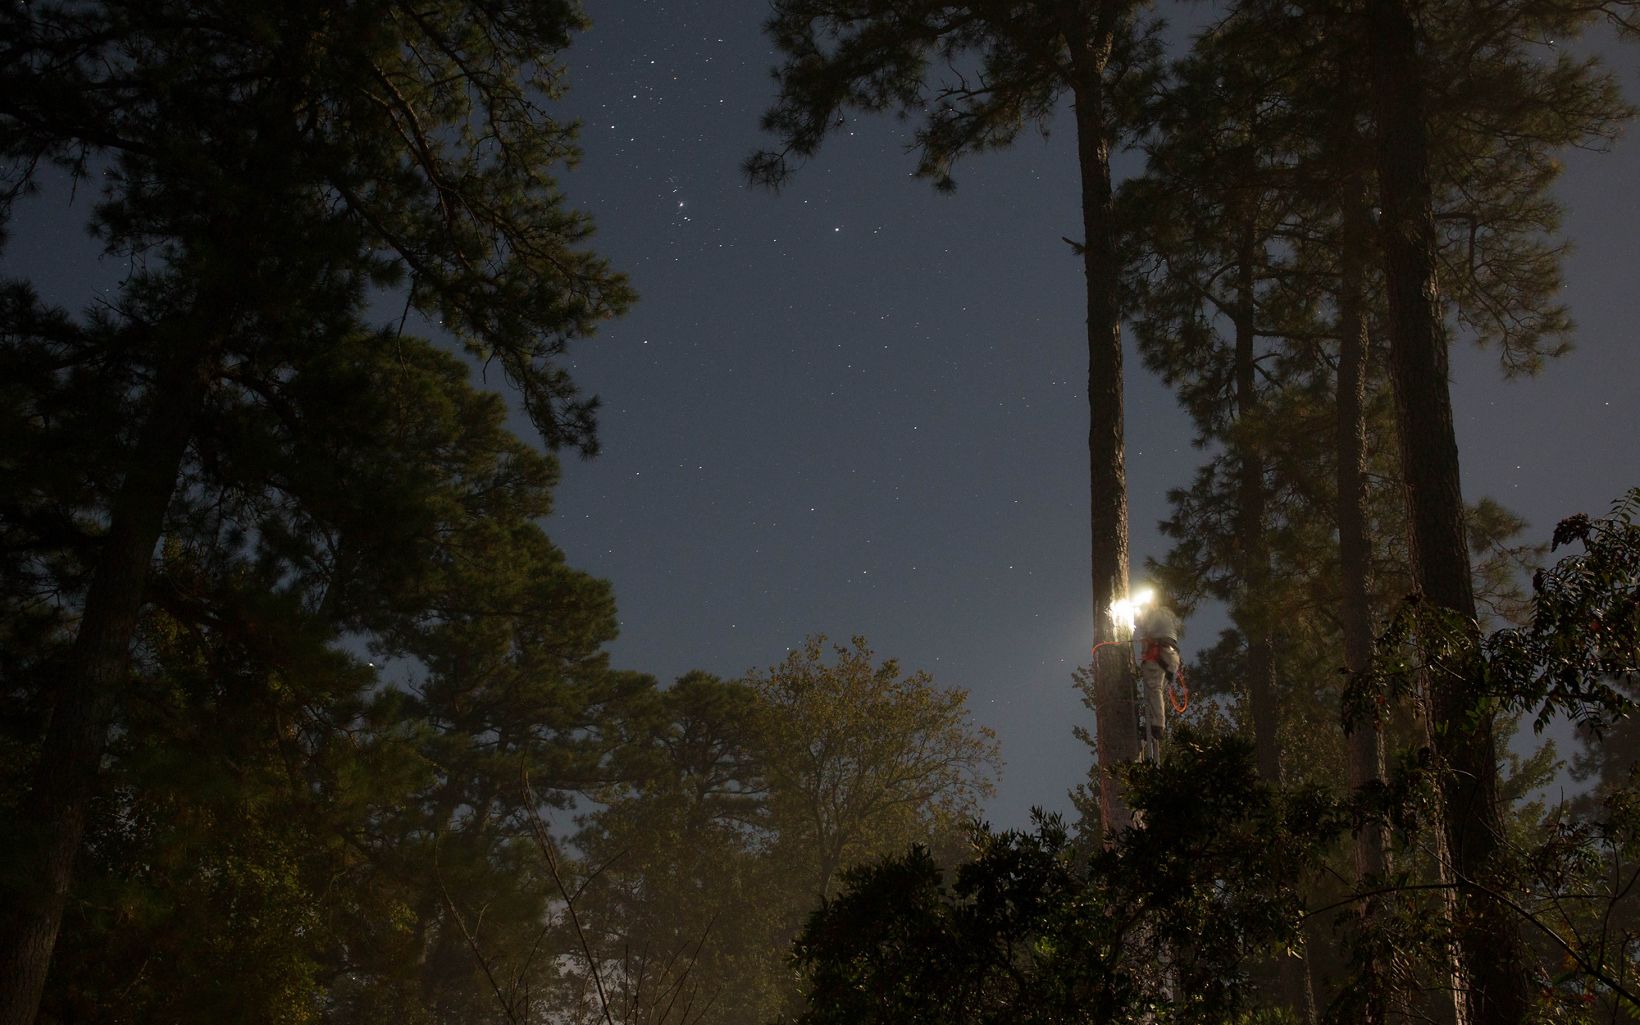 Nighttime view of a man standing at the top of a tall ladder braced against a pine tree. The light from his headlamp is a bright spot in the darkness. Stars are visible.